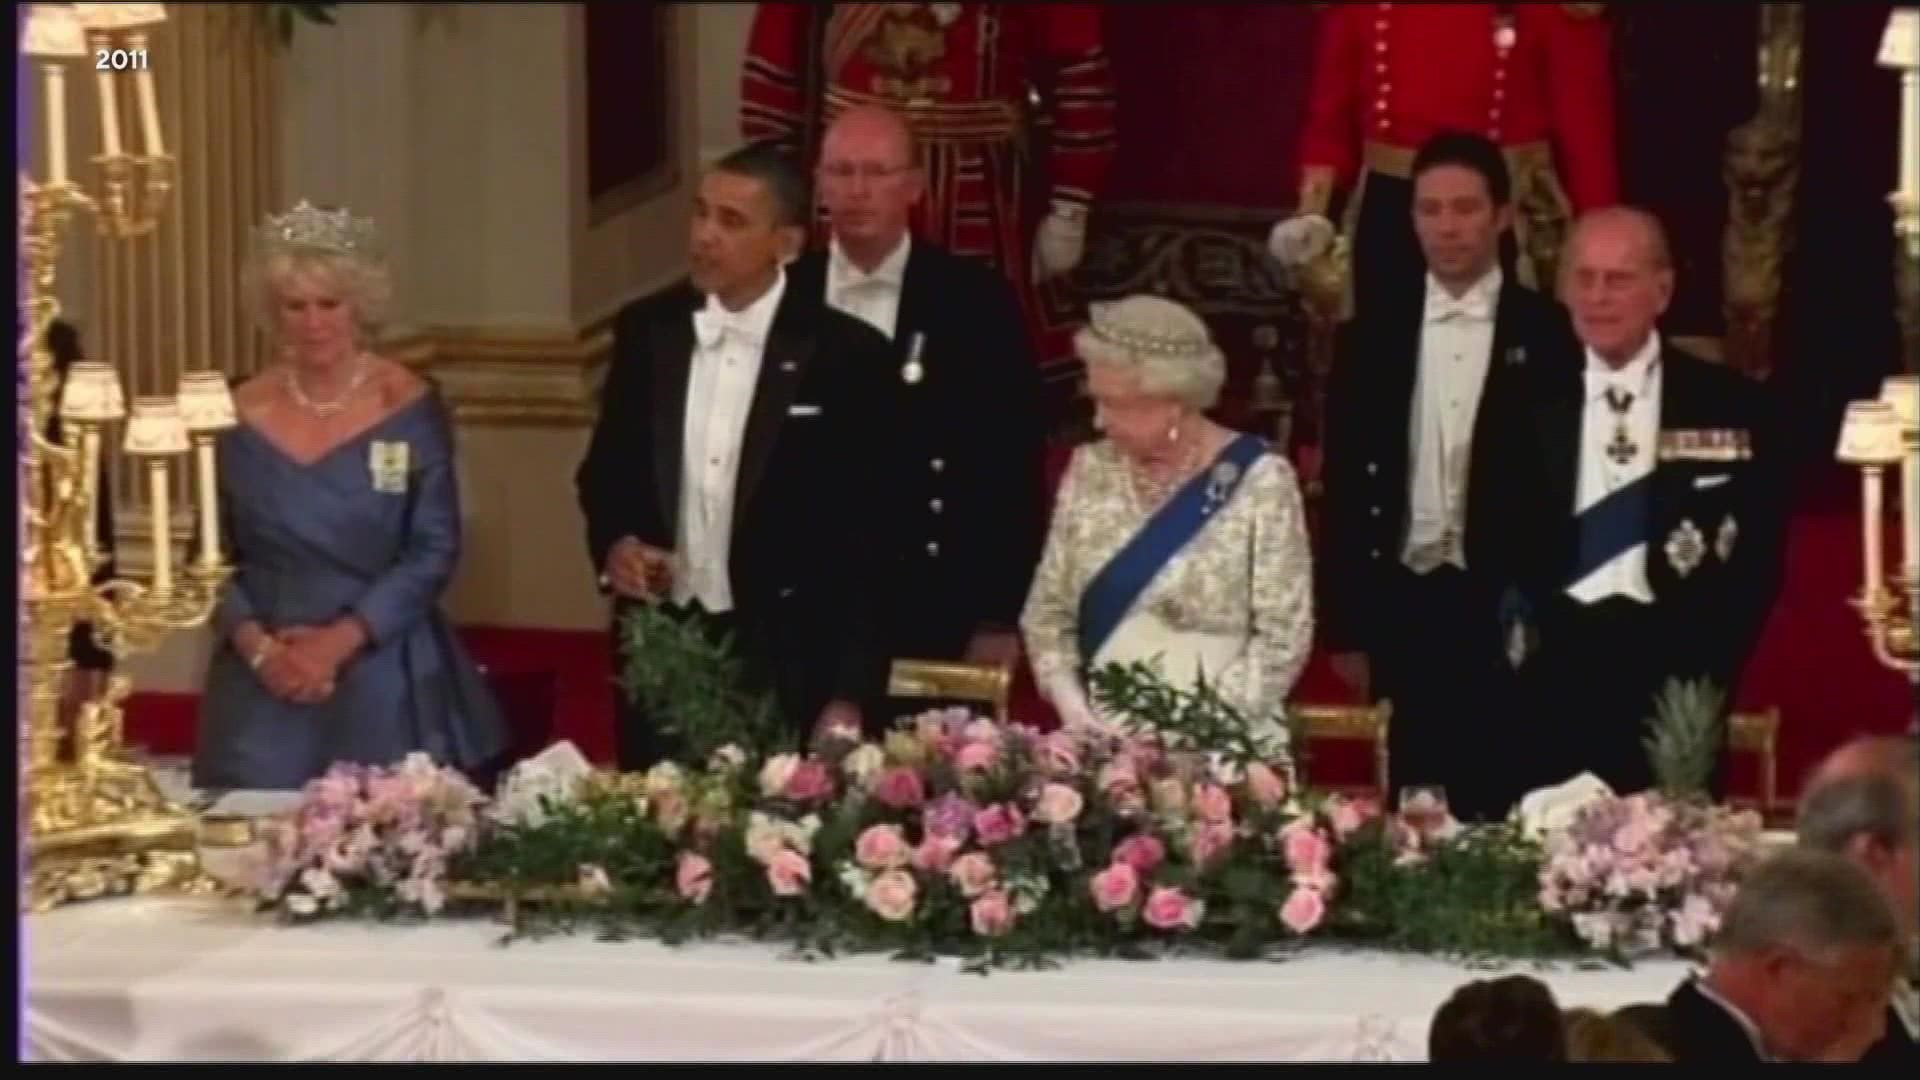 President Joe Biden and first lady Jill Biden paid their respects to Queen Elizabeth II as world leaders gathered in London ahead of the late monarch's state funeral